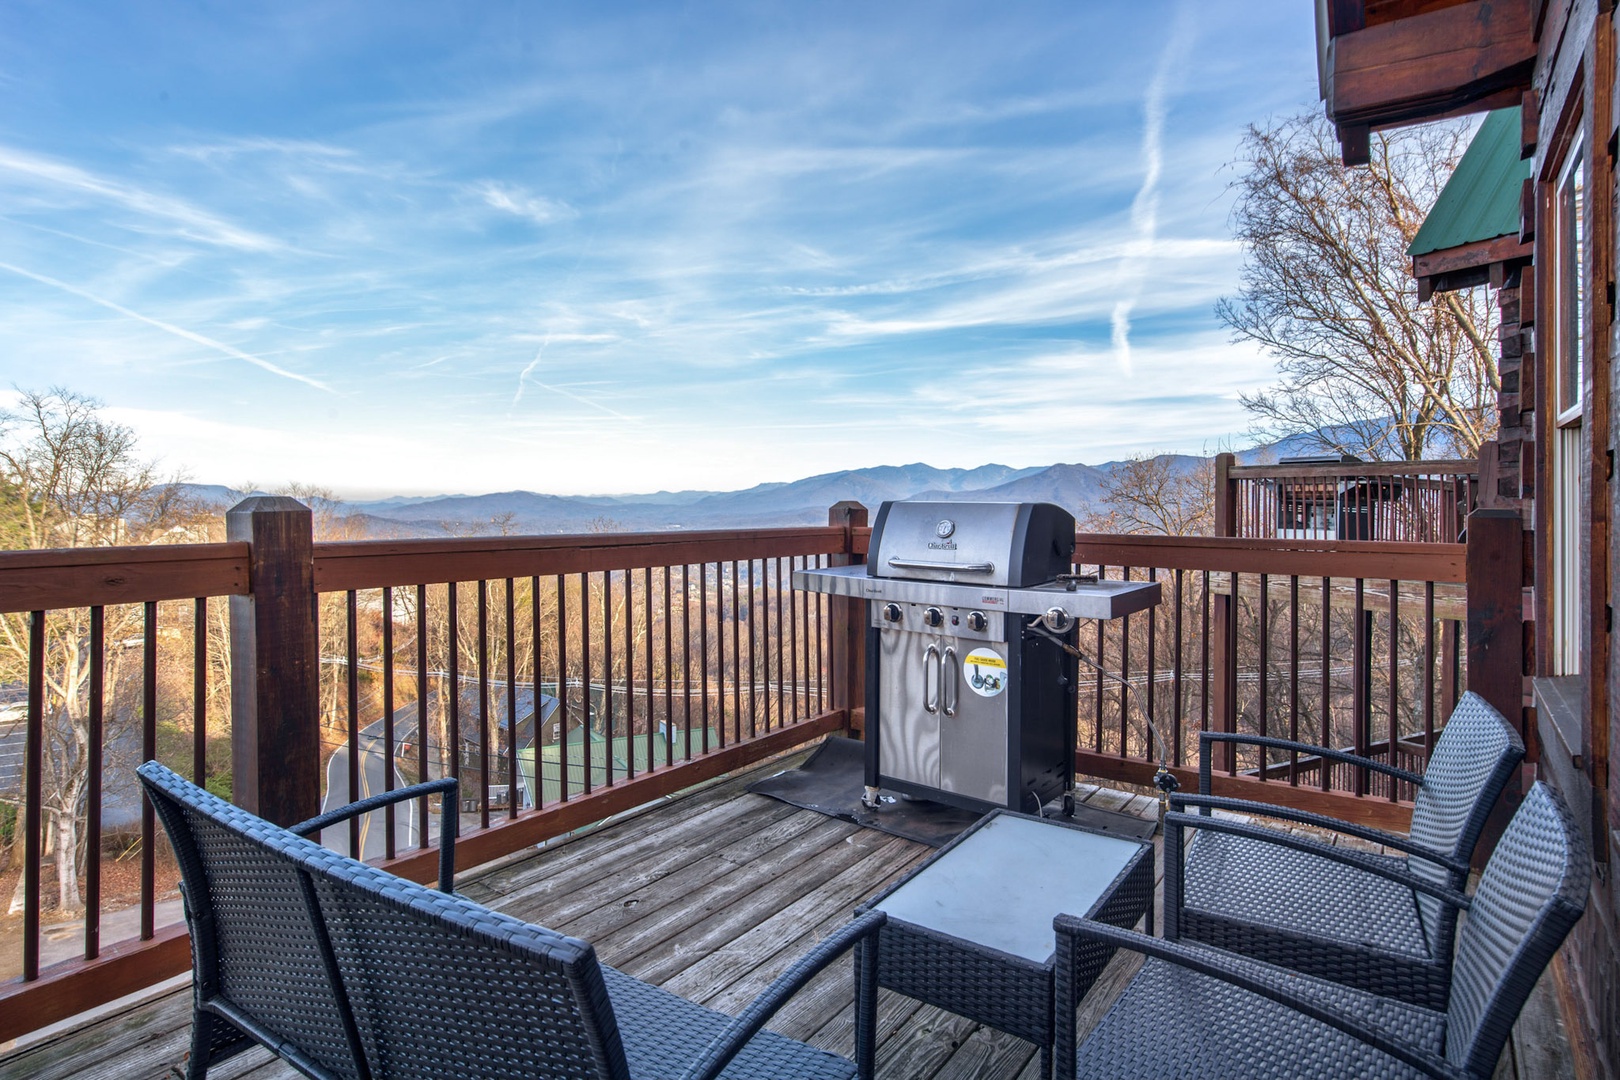 Take in the gorgeous views while you grill up a feast on the deck!